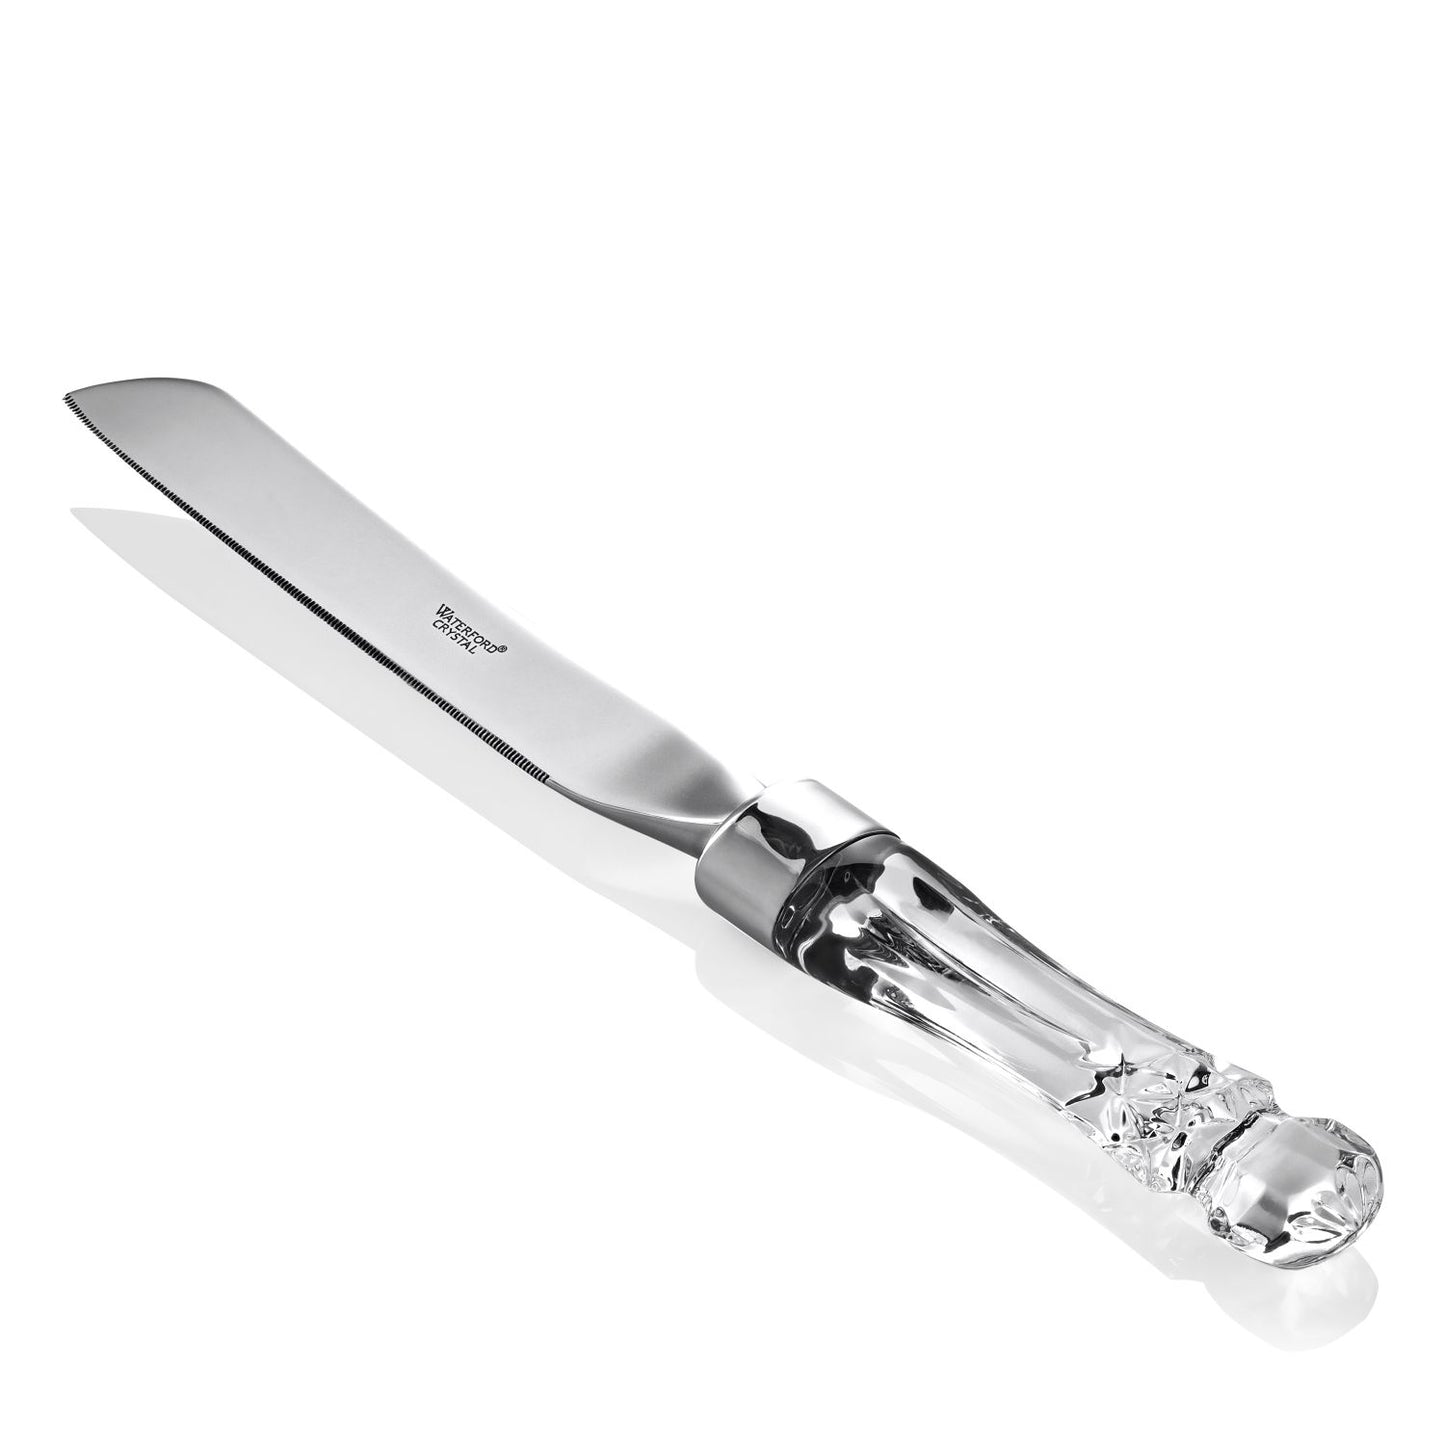 Waterford Lismore Bridal Knife, 14-Inch Lenght